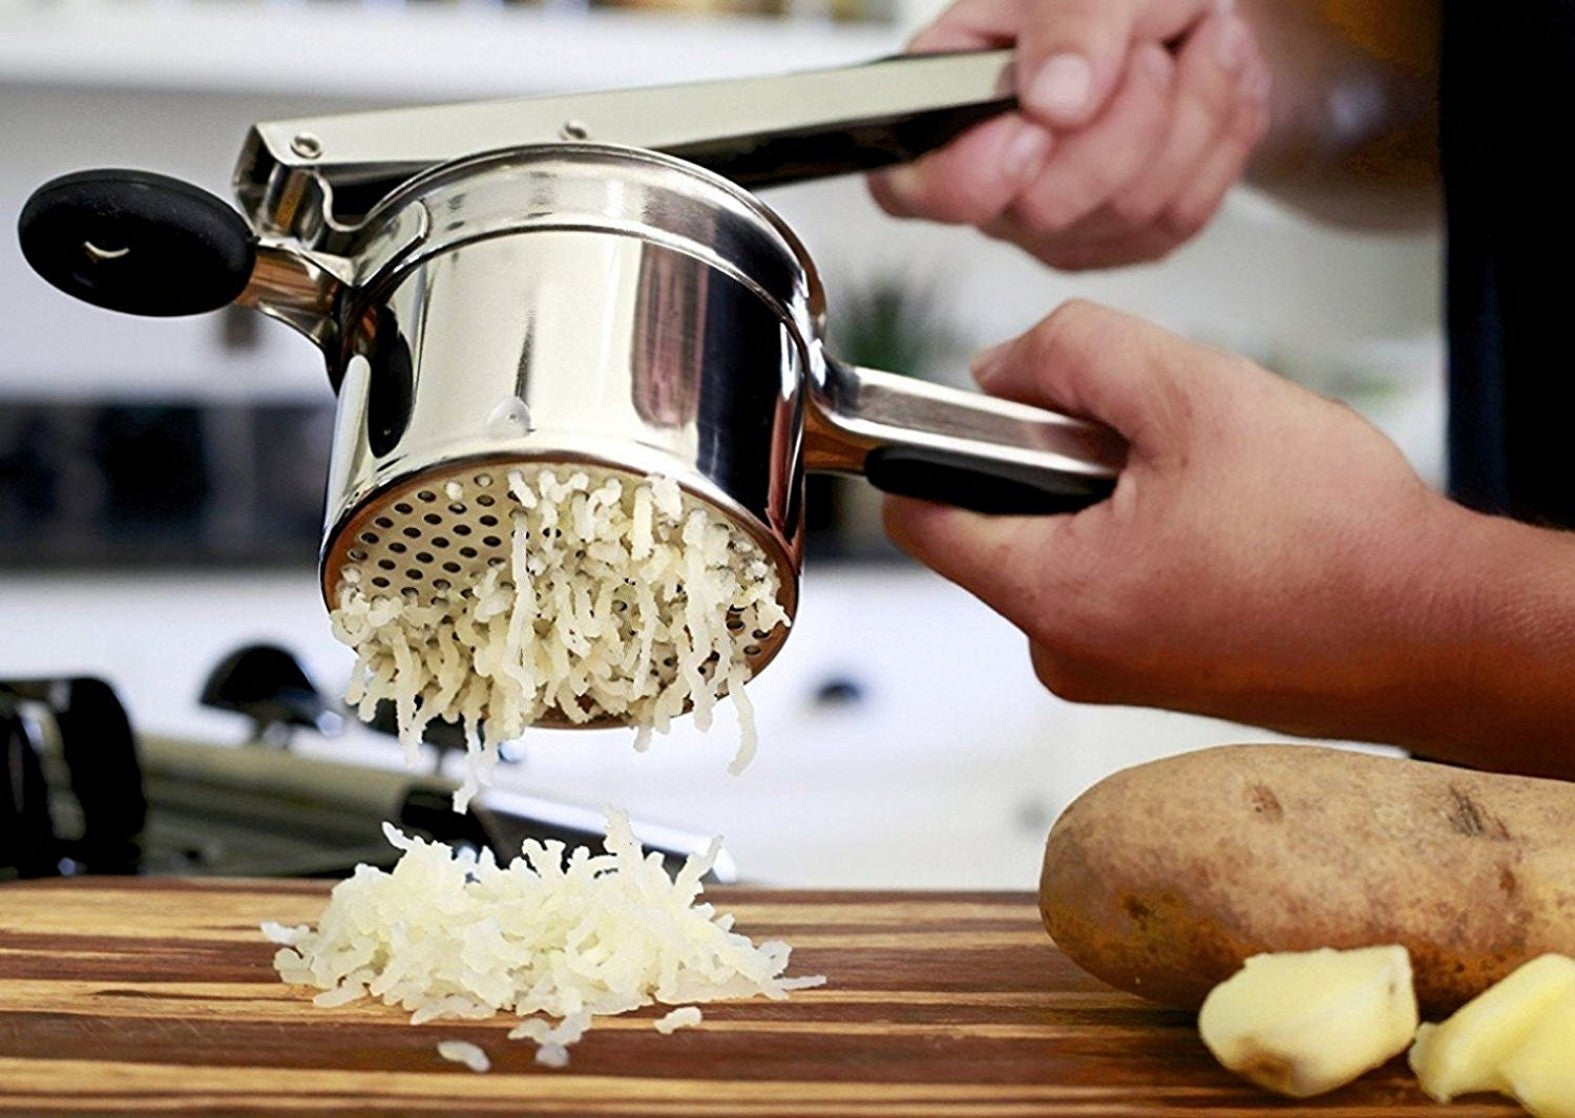 Should You Buy a Food Mill or a Potato Ricer?